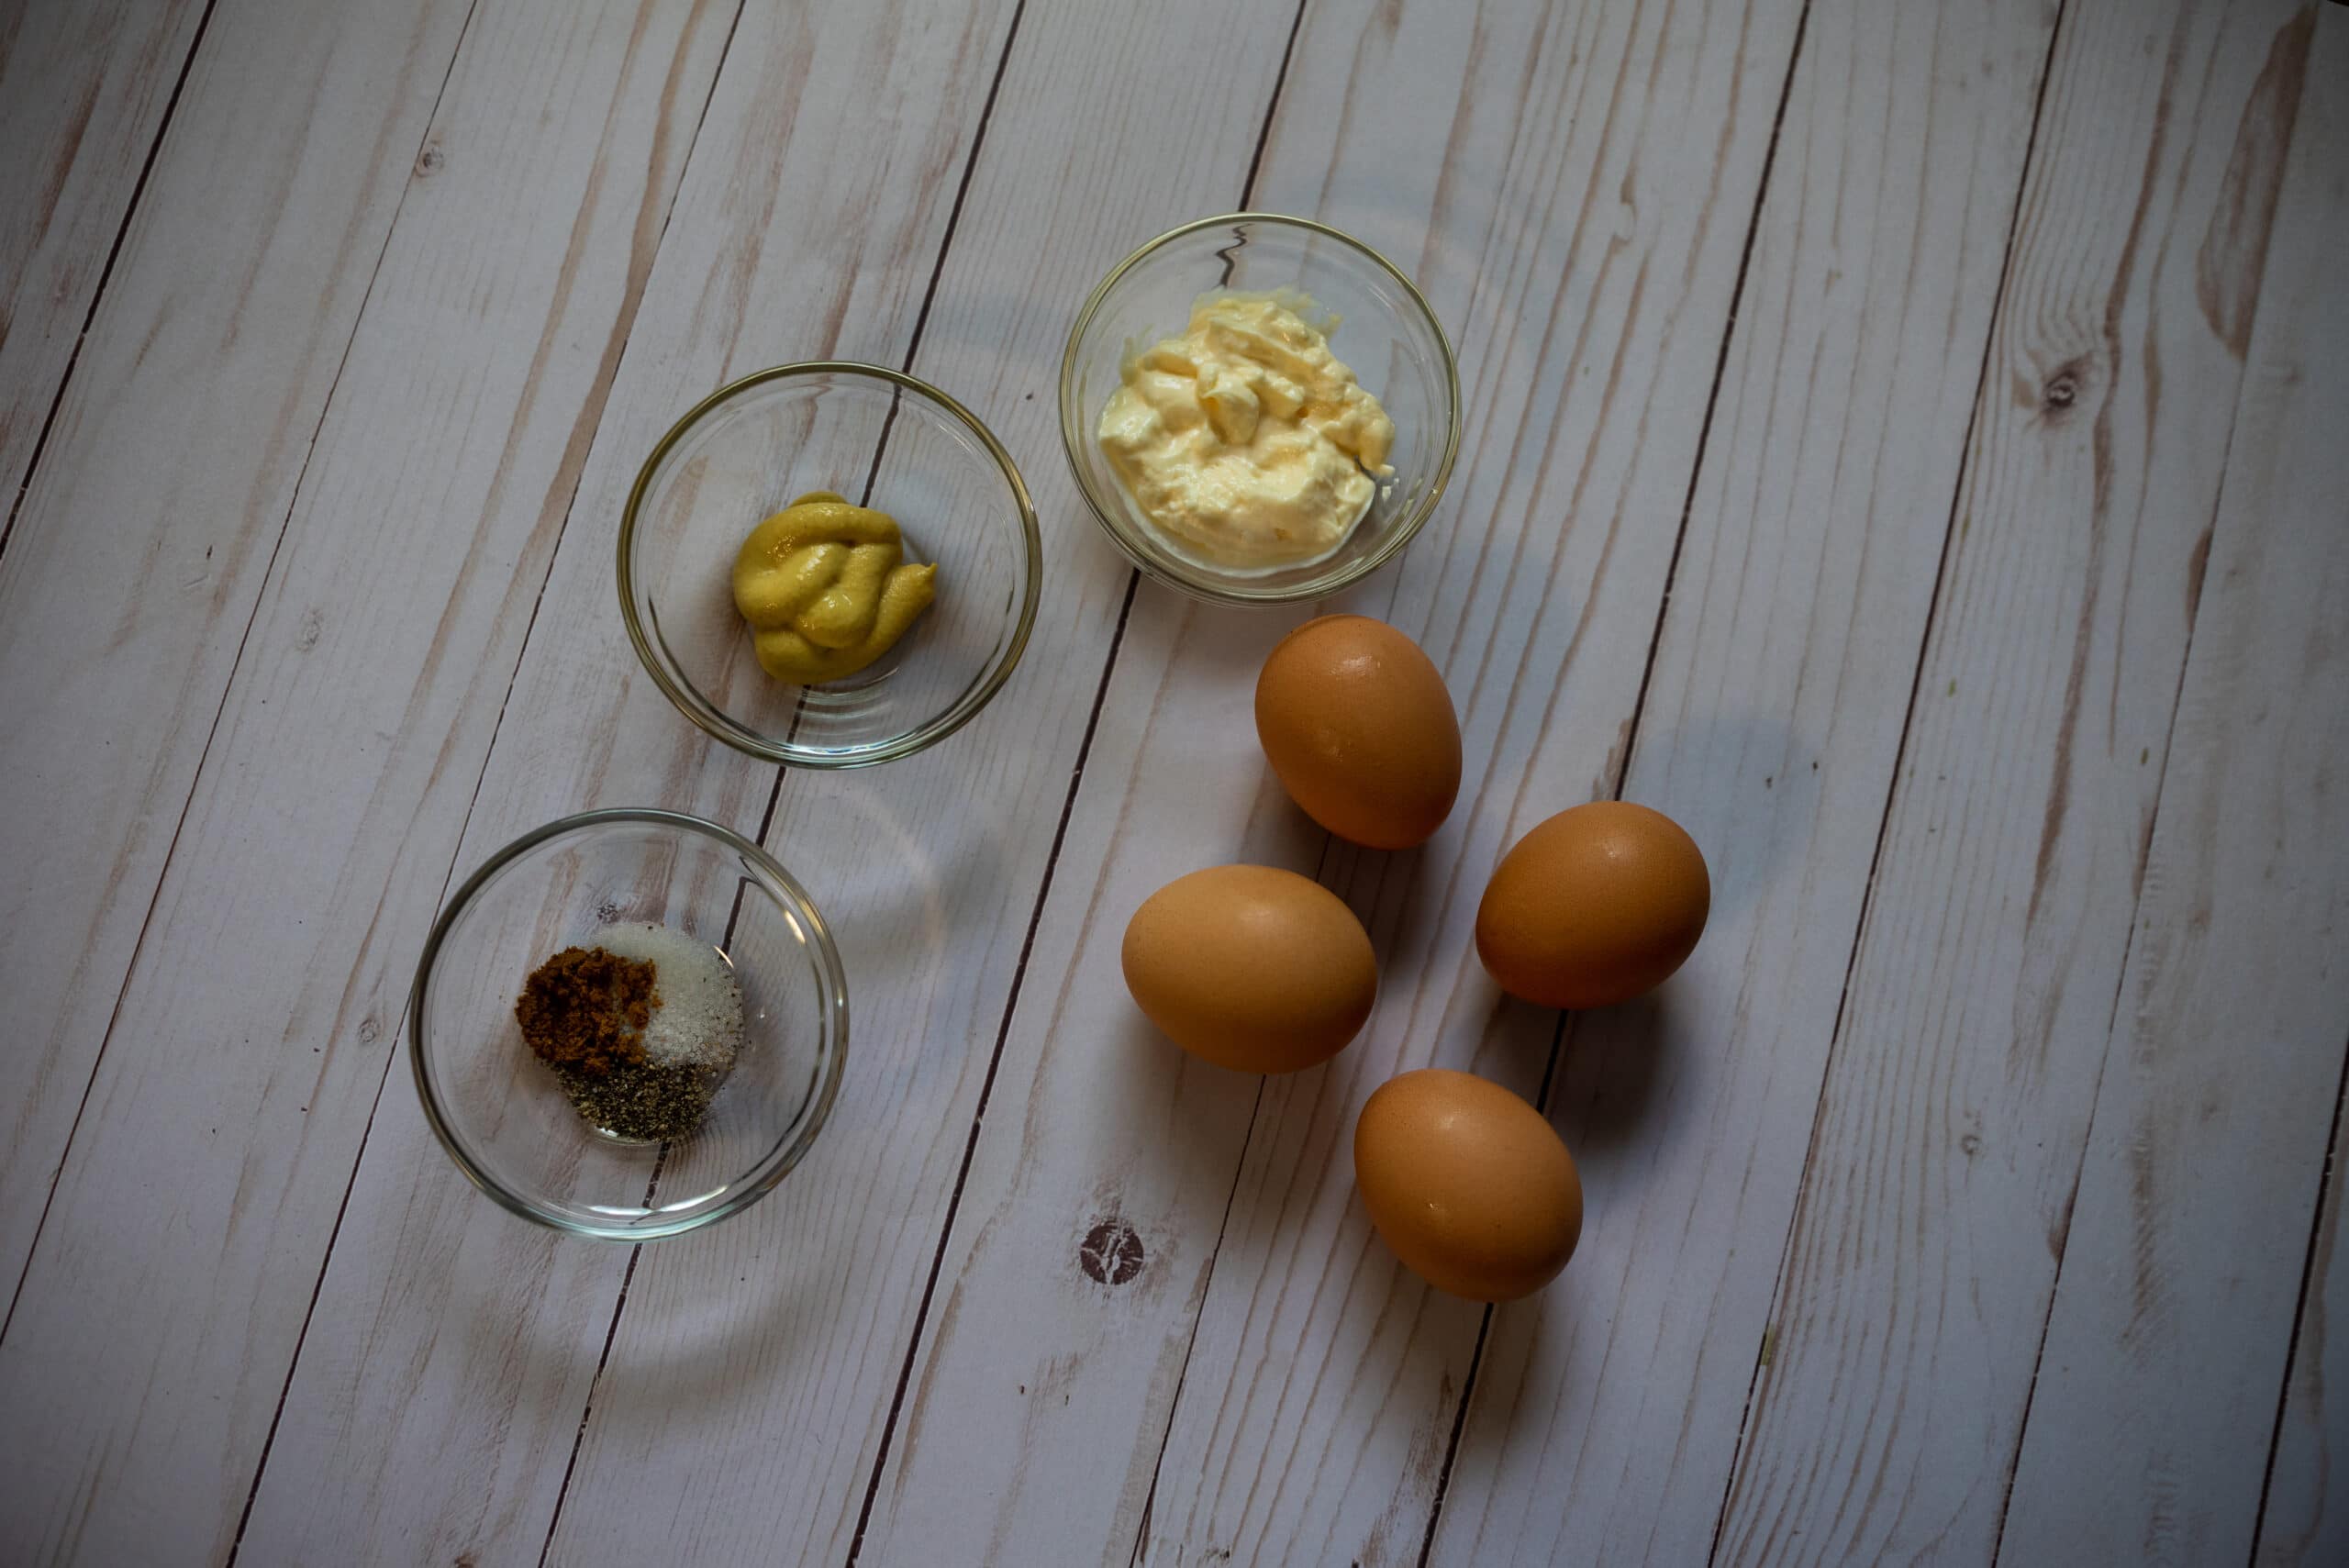 Ingredients for curried deviled eggs. Brown eggs and ingredients in clear bowl on a wood table 